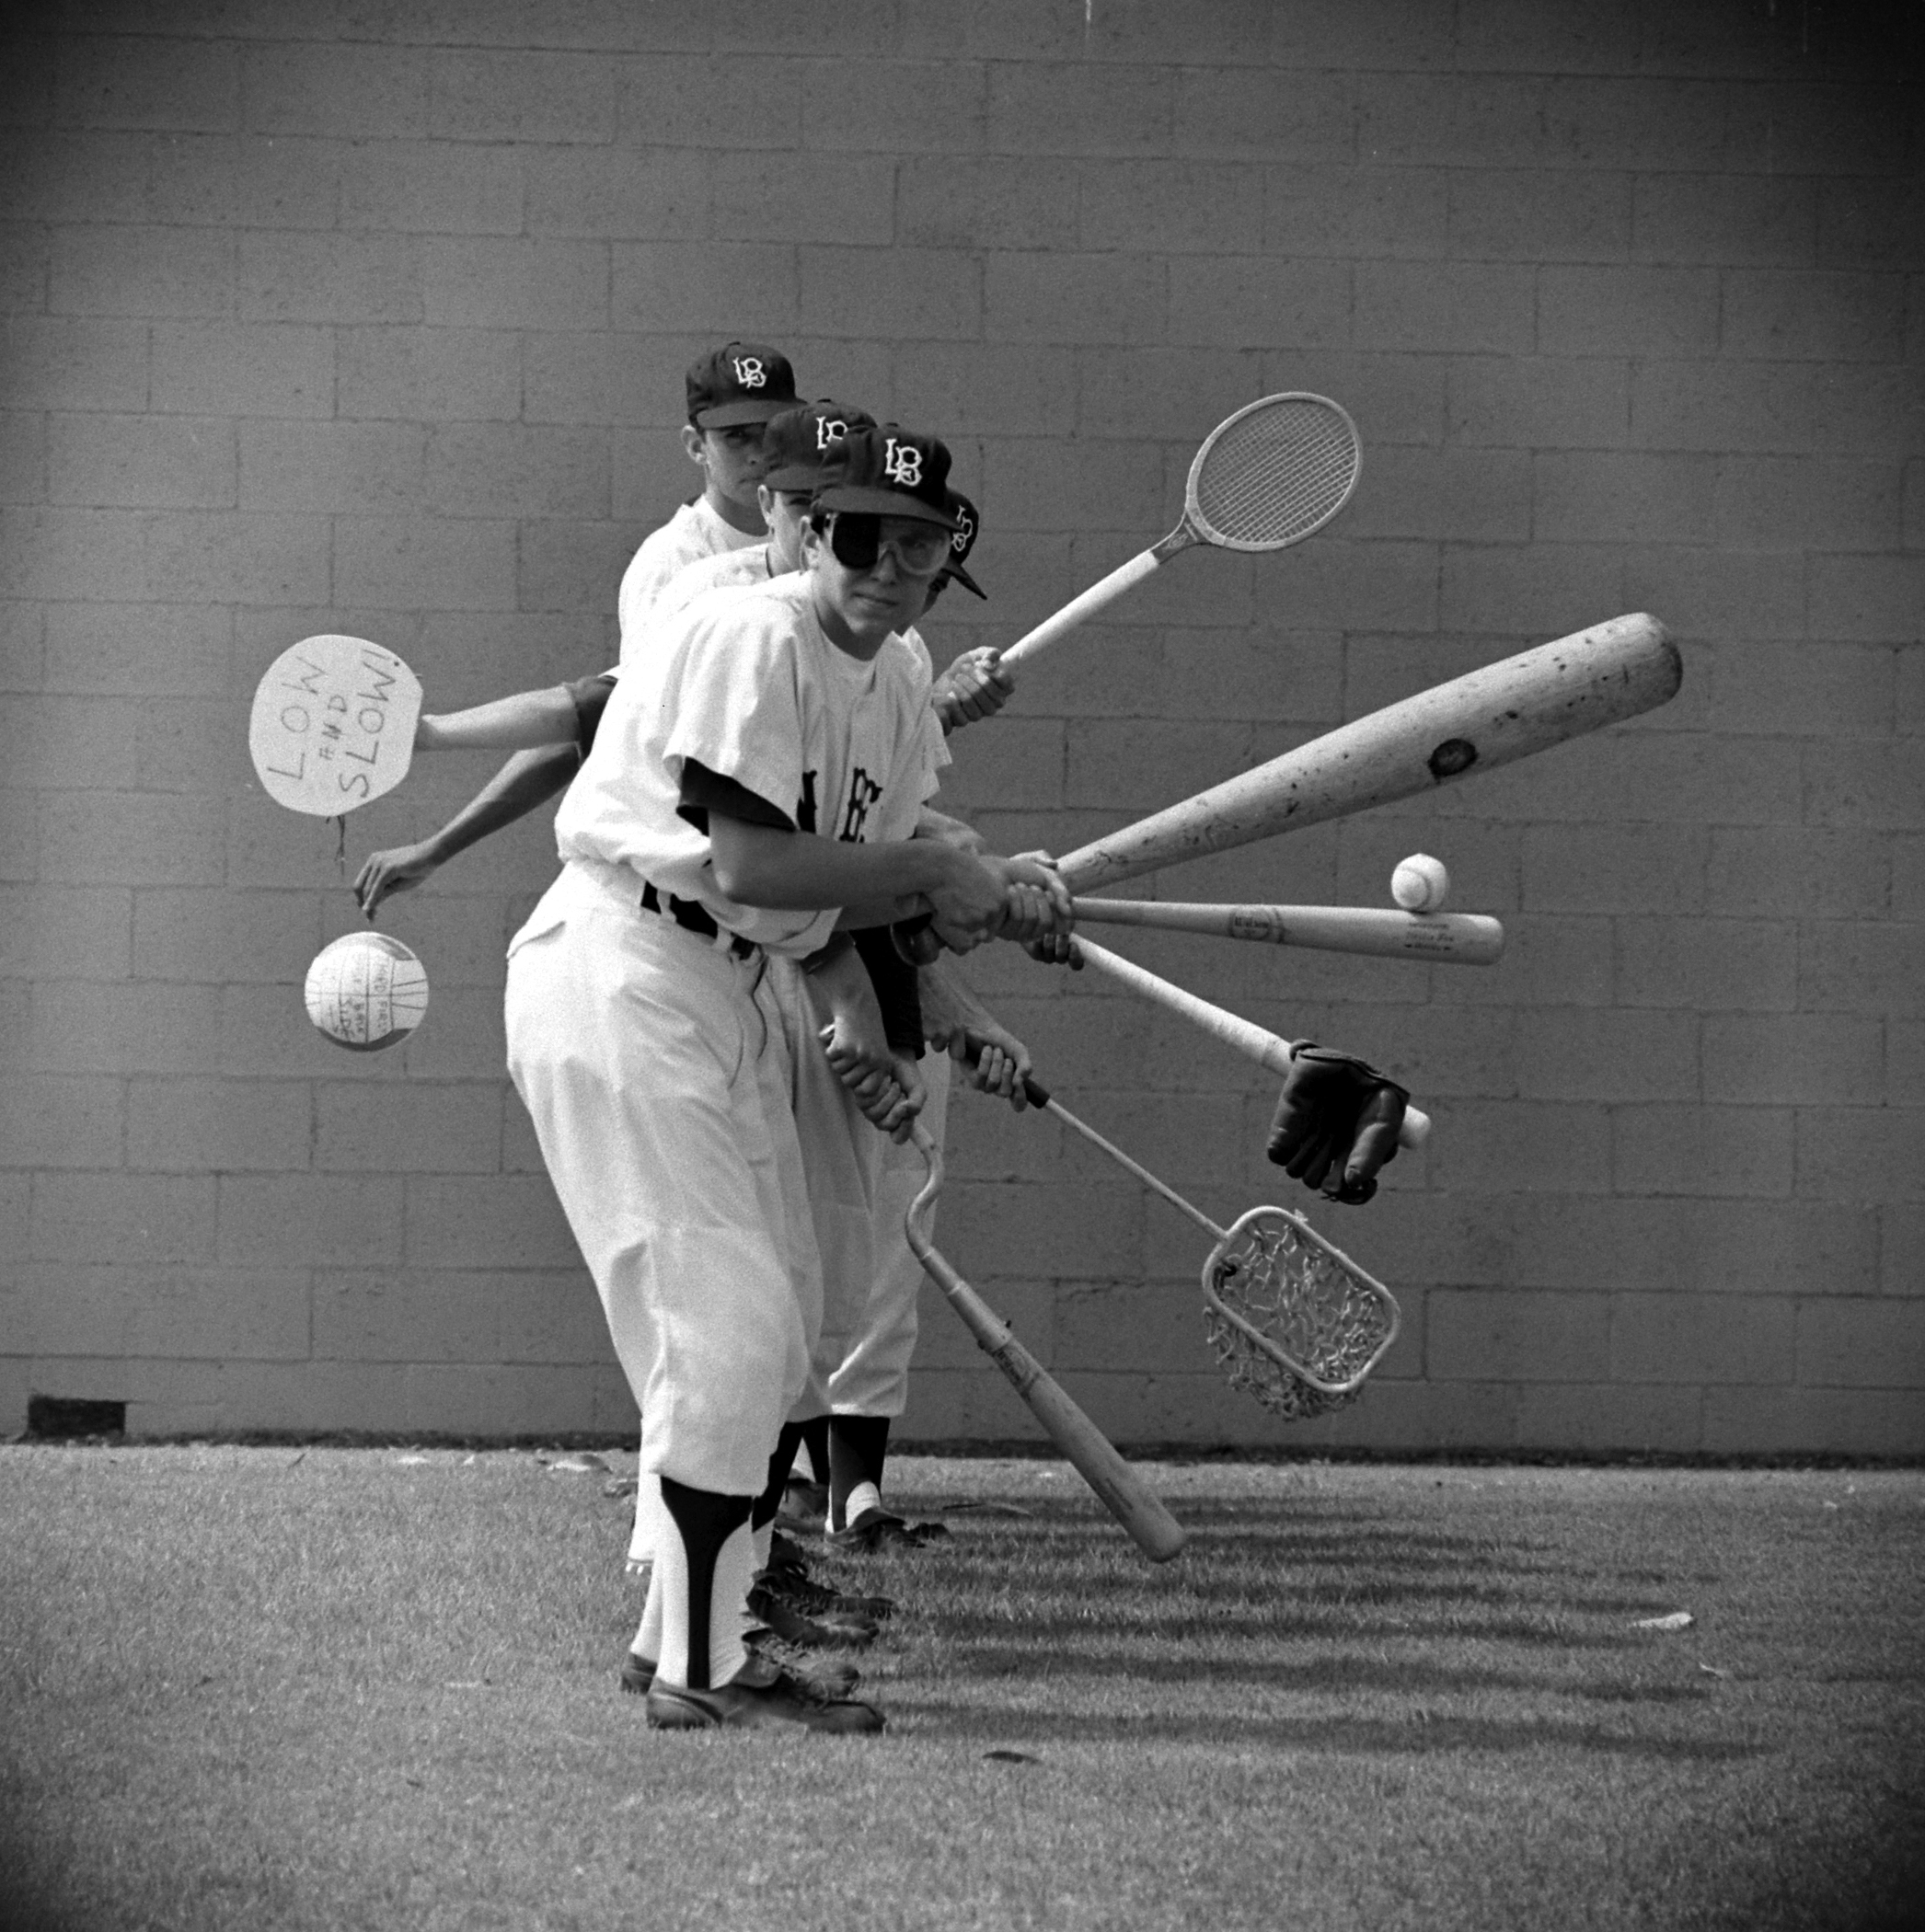 Long Beach Polytechnic High School players practice using unconventional equipment such as tennis rackets, paddles and a volleyball, 1966.